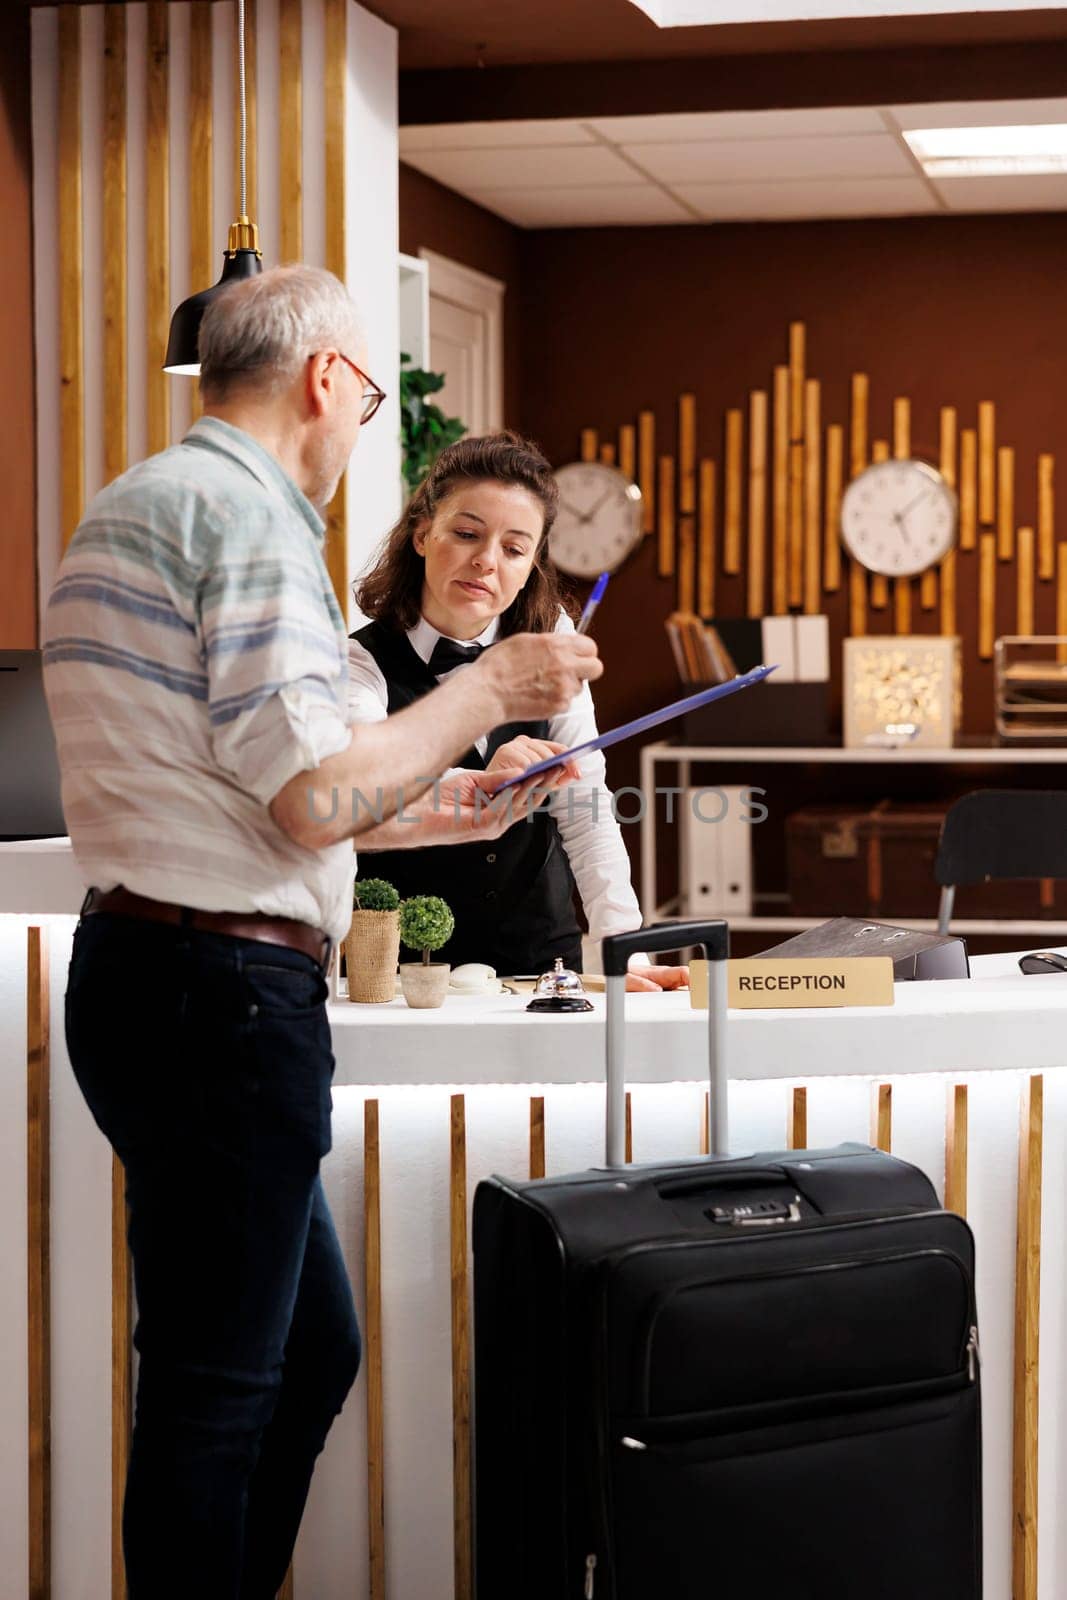 Old man checking in at hotel reception by DCStudio